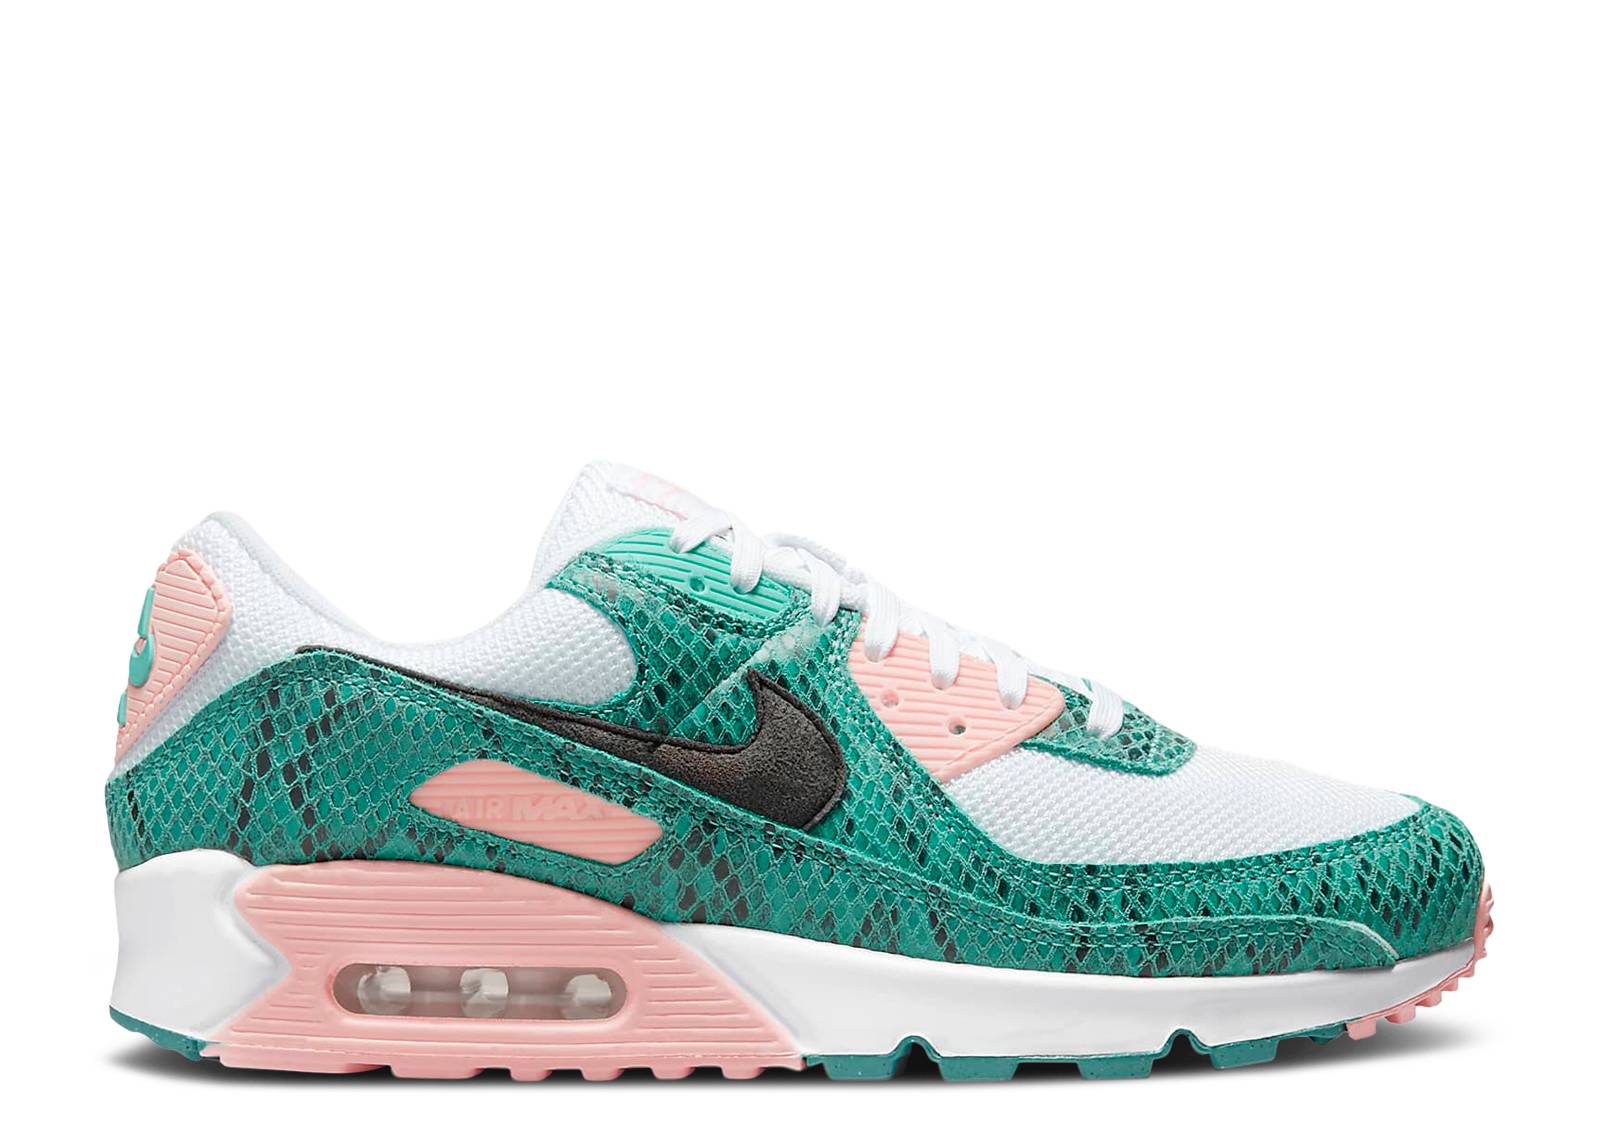 Air Max 90 'Washed Teal Snakeskin'